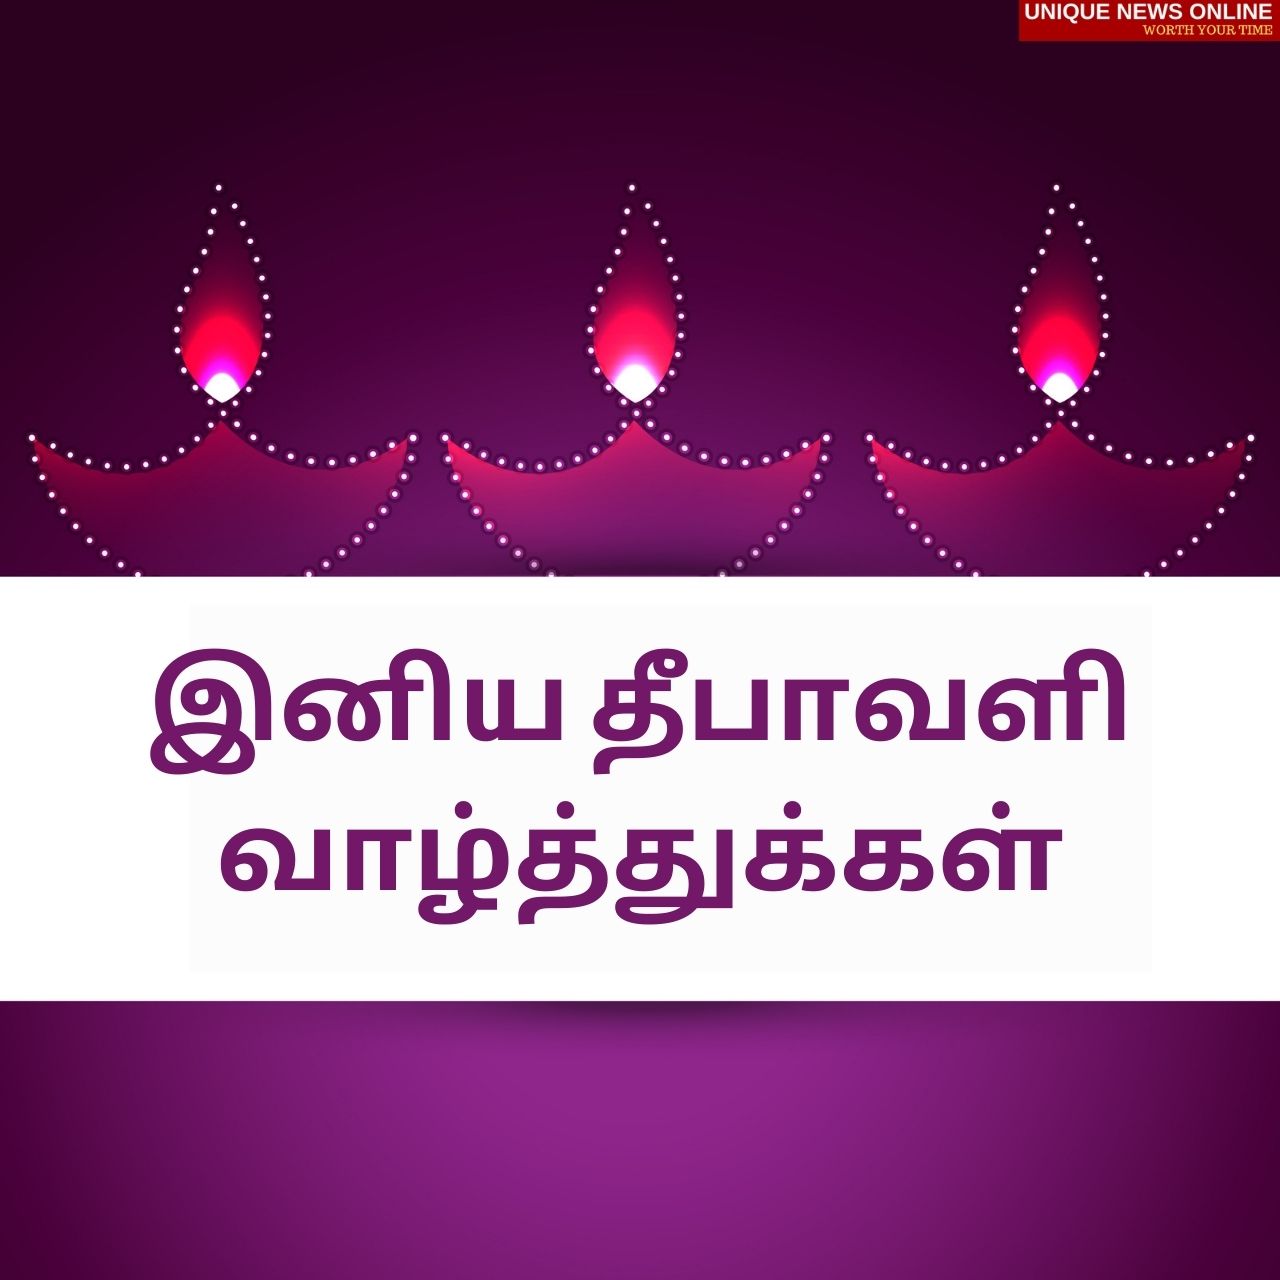 Happy Diwali 2021 Tamil and Telugu Quotes, Wishes, HD Images, Messages, Greetings to Share